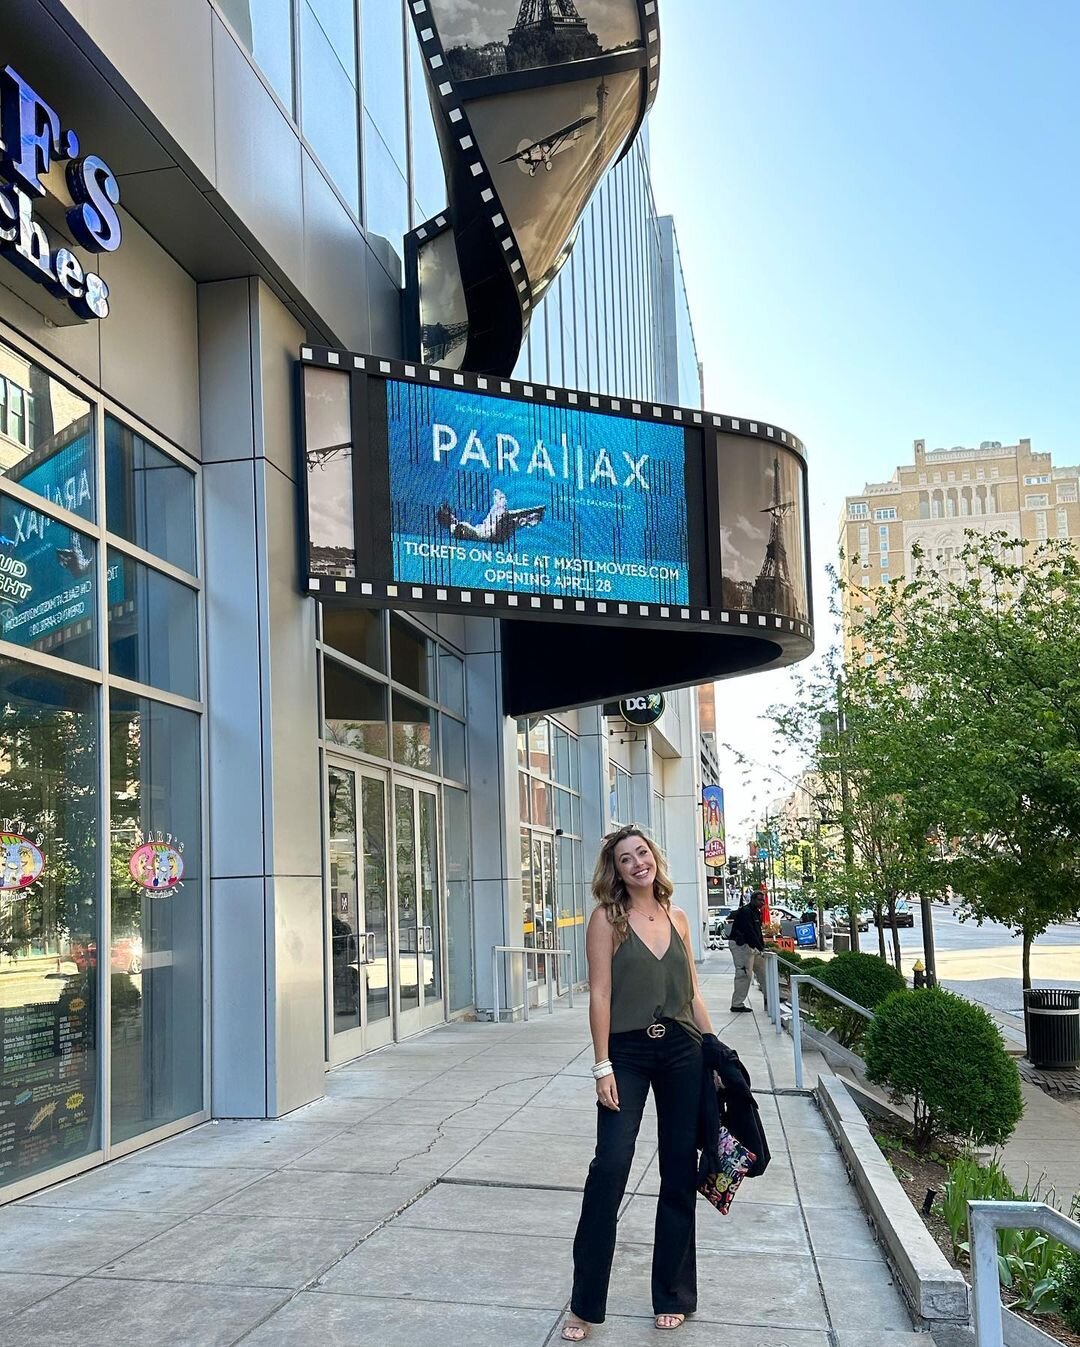 Our beautiful and talented @hattiekpsmith under our Parallax marquee at @mxstlmovies. We loved getting to take our very special movie to the hometown of one of our stars. Thank you, St. Louis!

If you've seen parallax, drop us a review! Send all revi